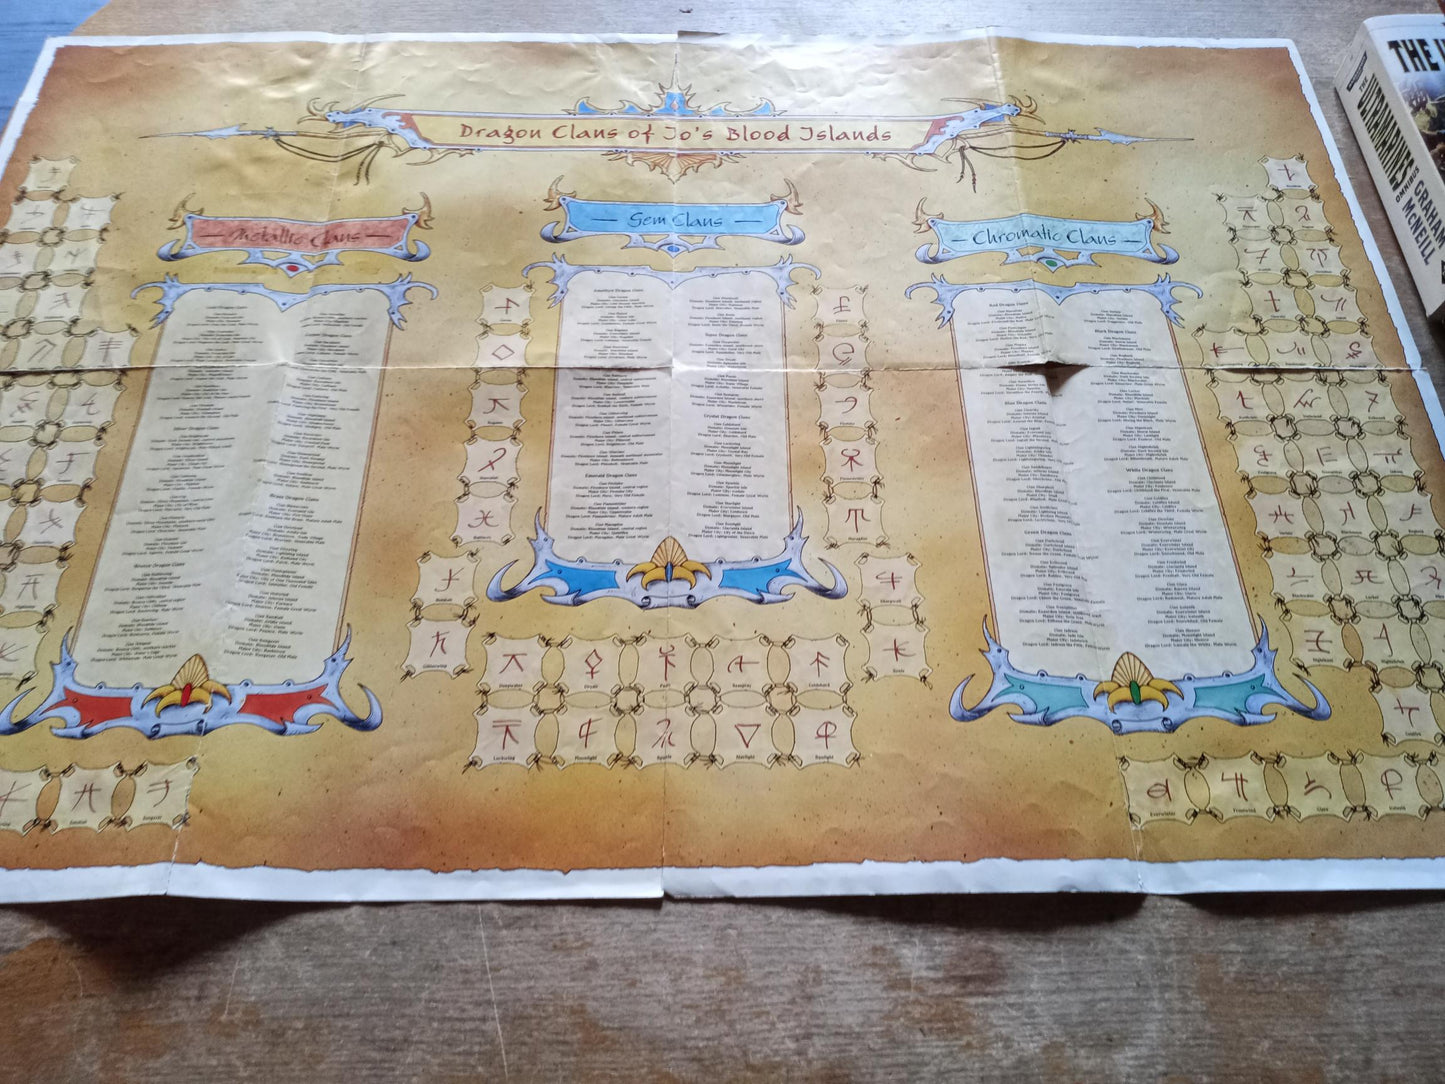 AD&D Dragon Clans of jo's Blood Islands Poster TSR 1994